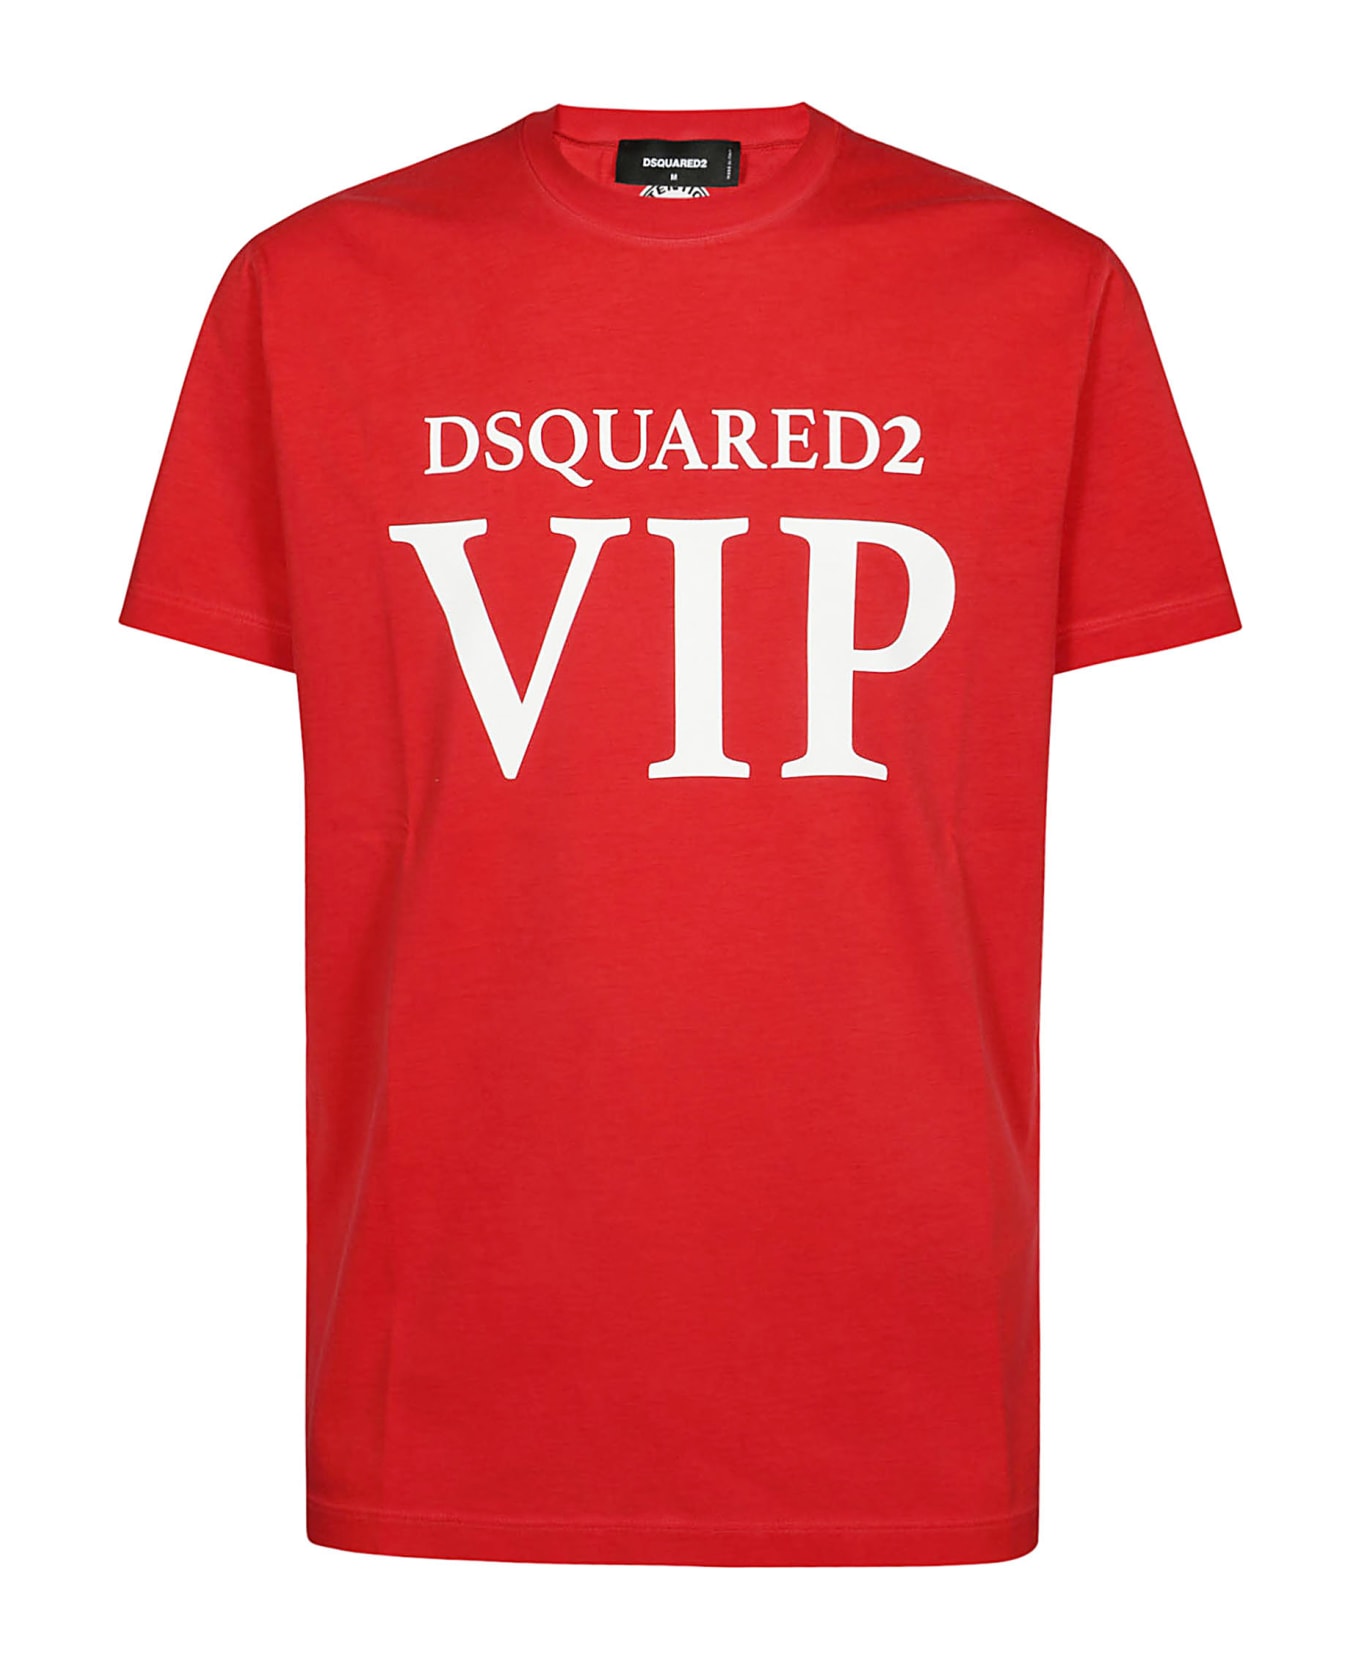 Dsquared2 Cool Fit T-shirt - Red